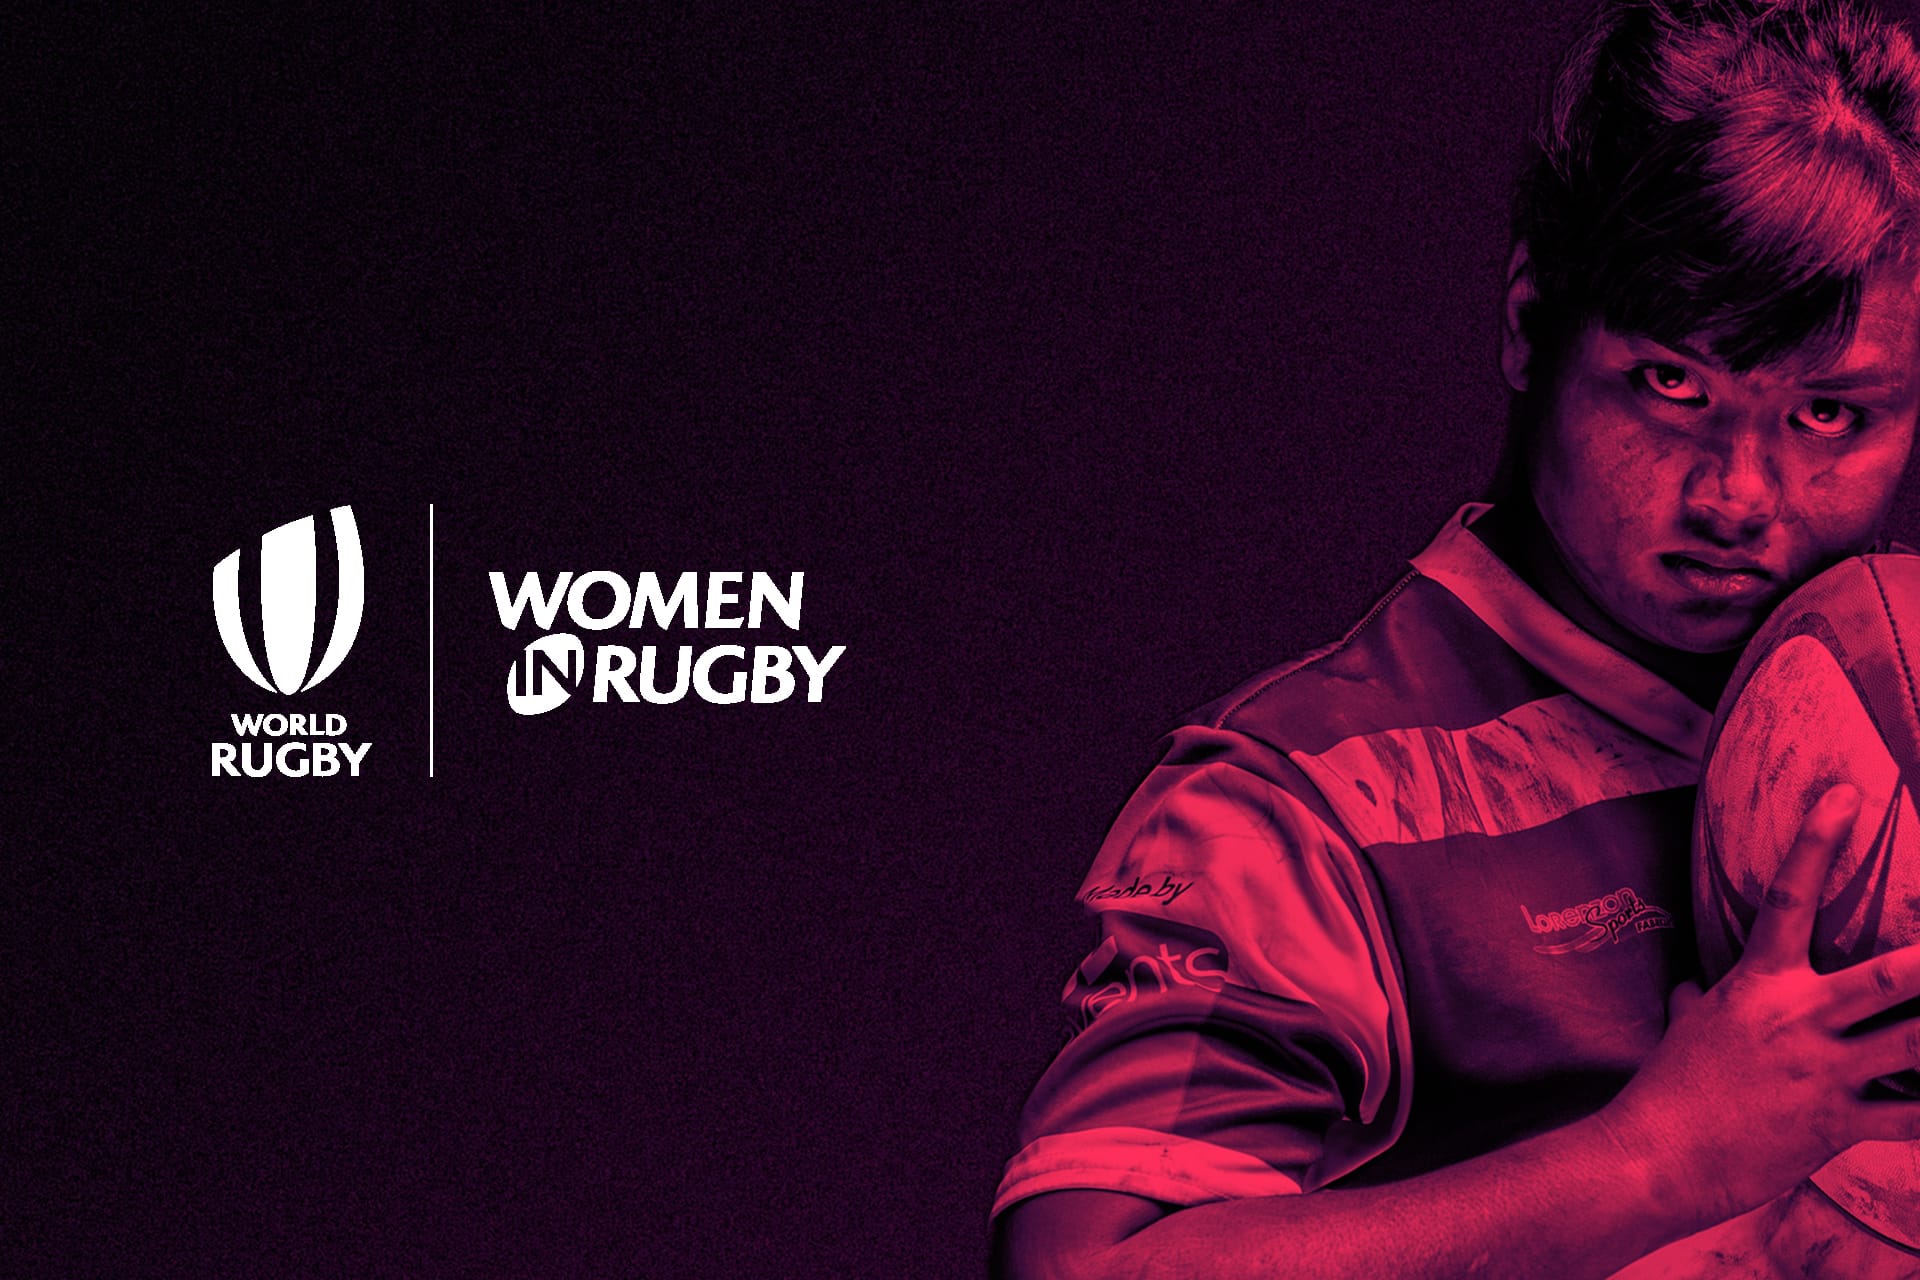 Women’s Rugby World Cup Campaign